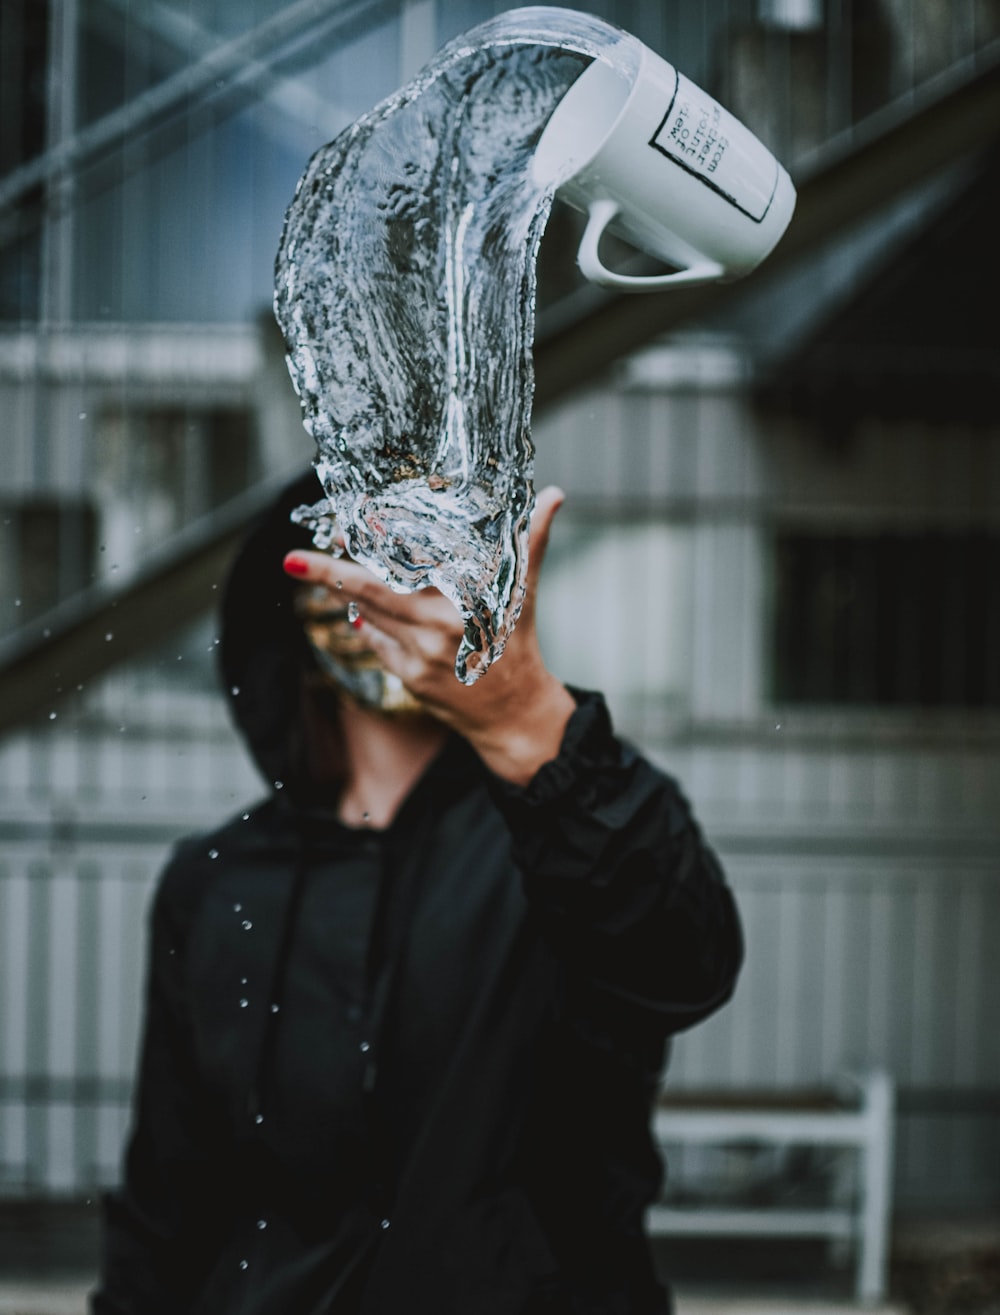 person throw mug with water